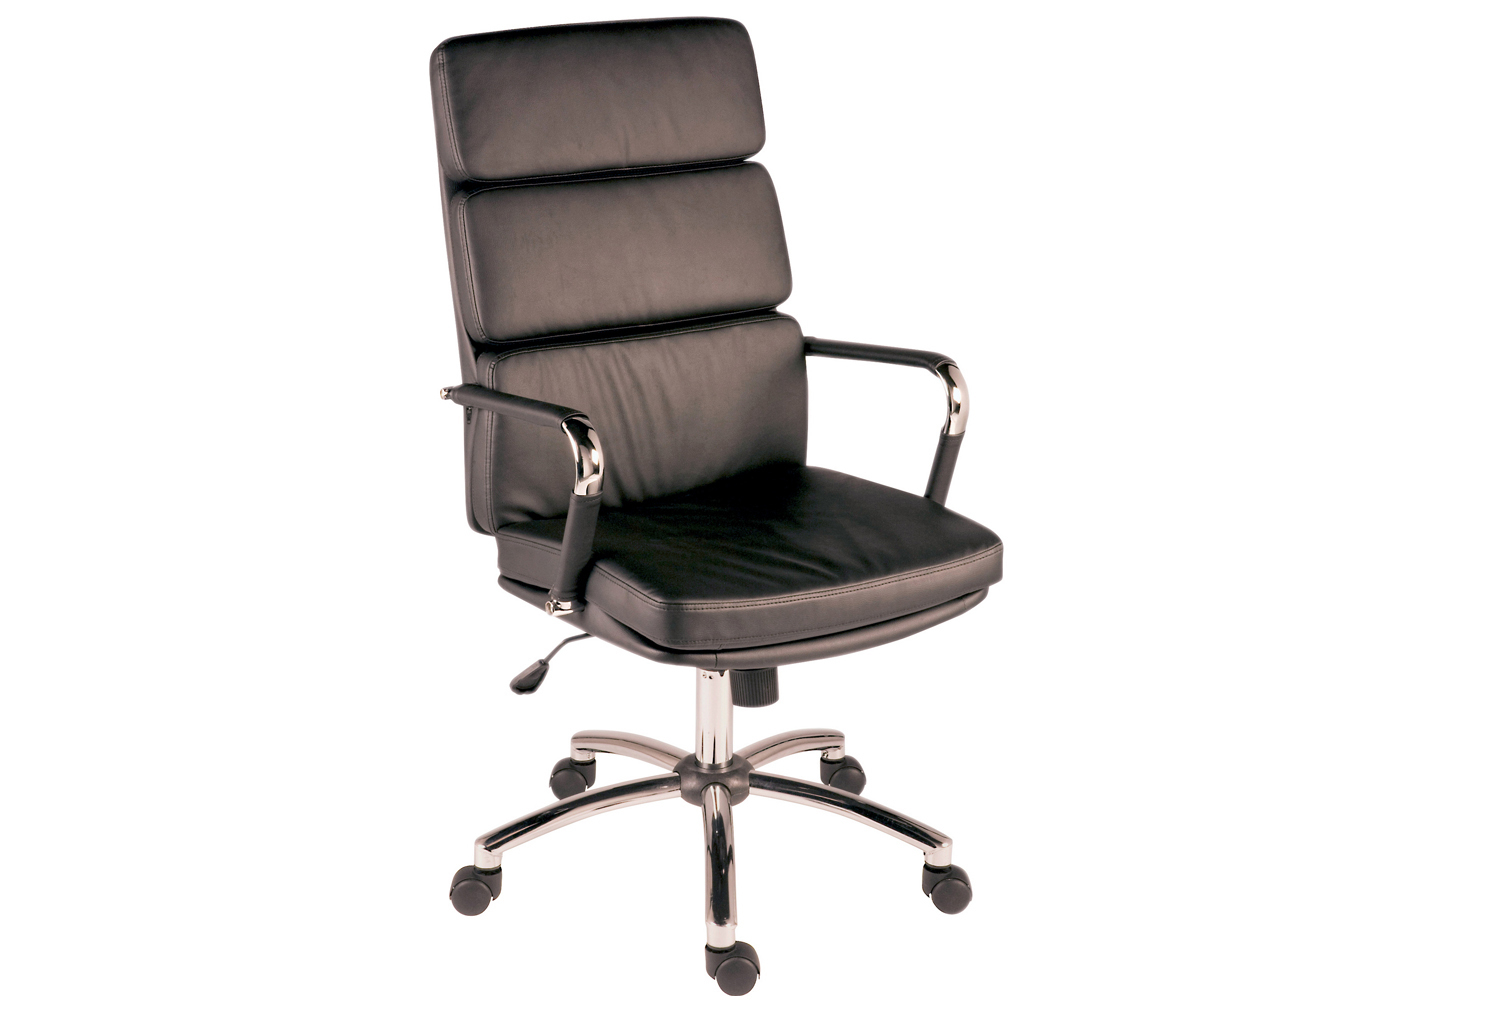 Crowne Leather Faced Executive Office Chair, Black